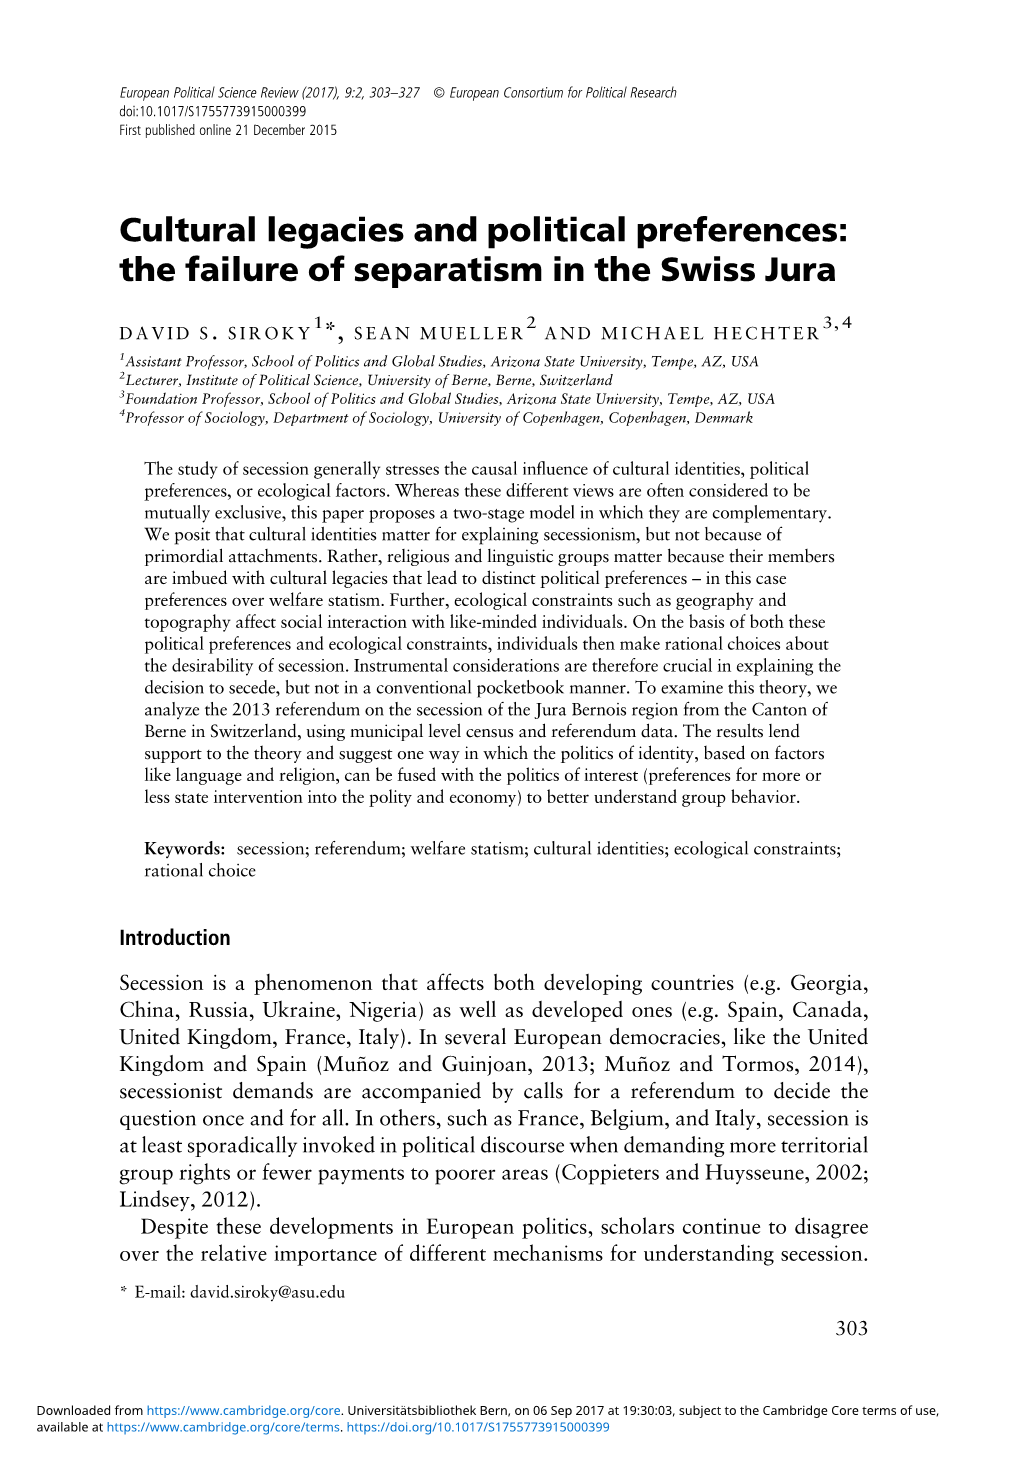 Cultural Legacies and Political Preferences: the Failure of Separatism in the Swiss Jura